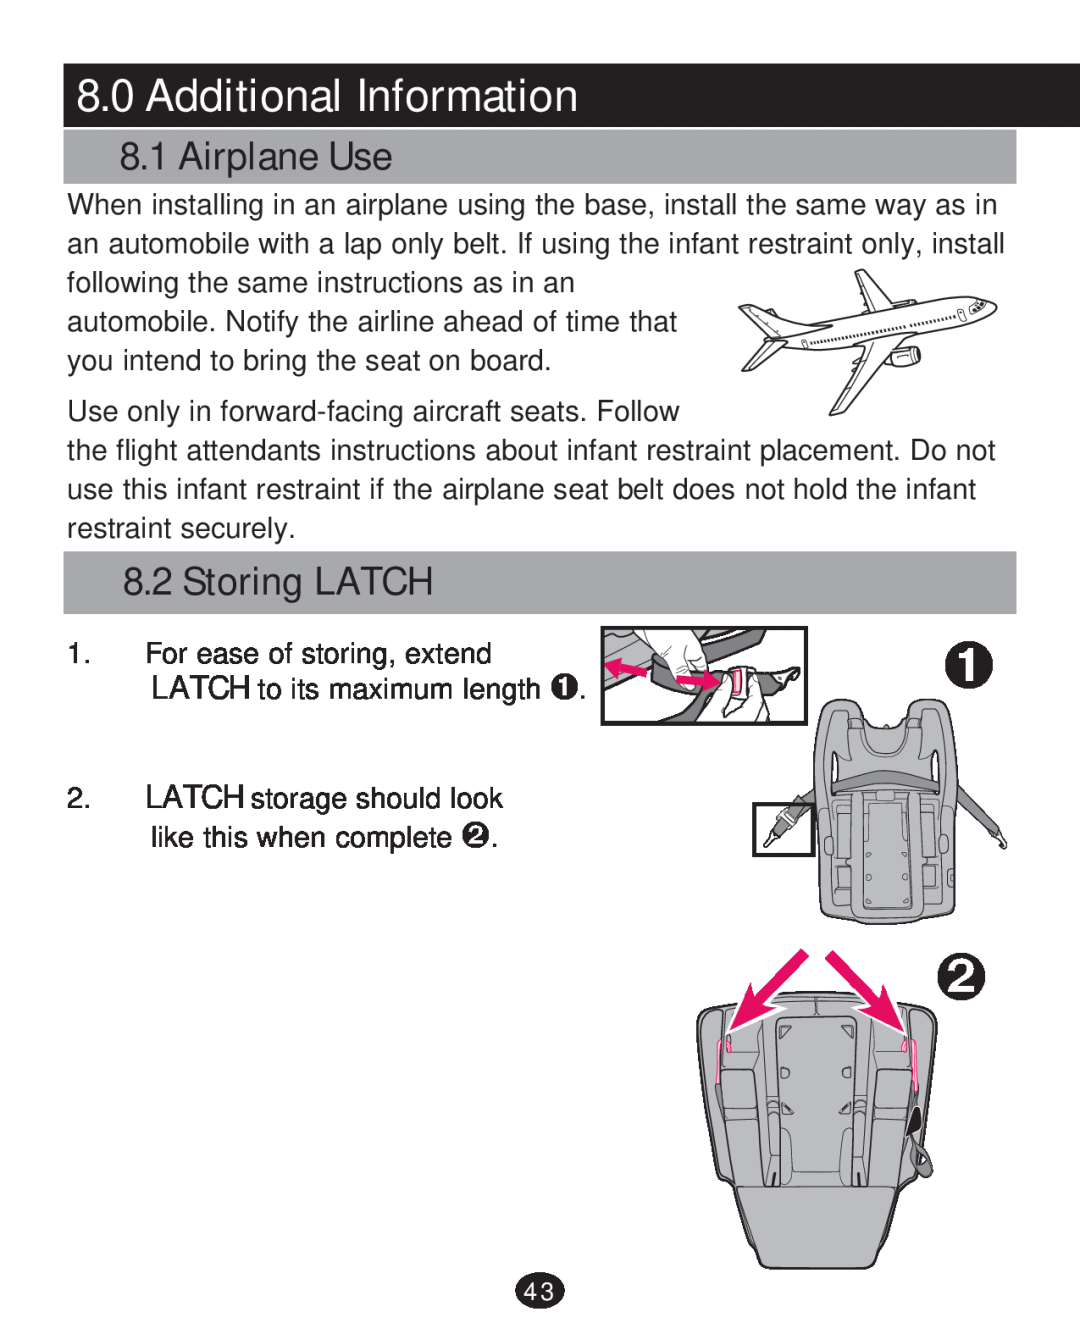 Graco 30 manual Additional Information, Airplane Use, Storing LATCH 